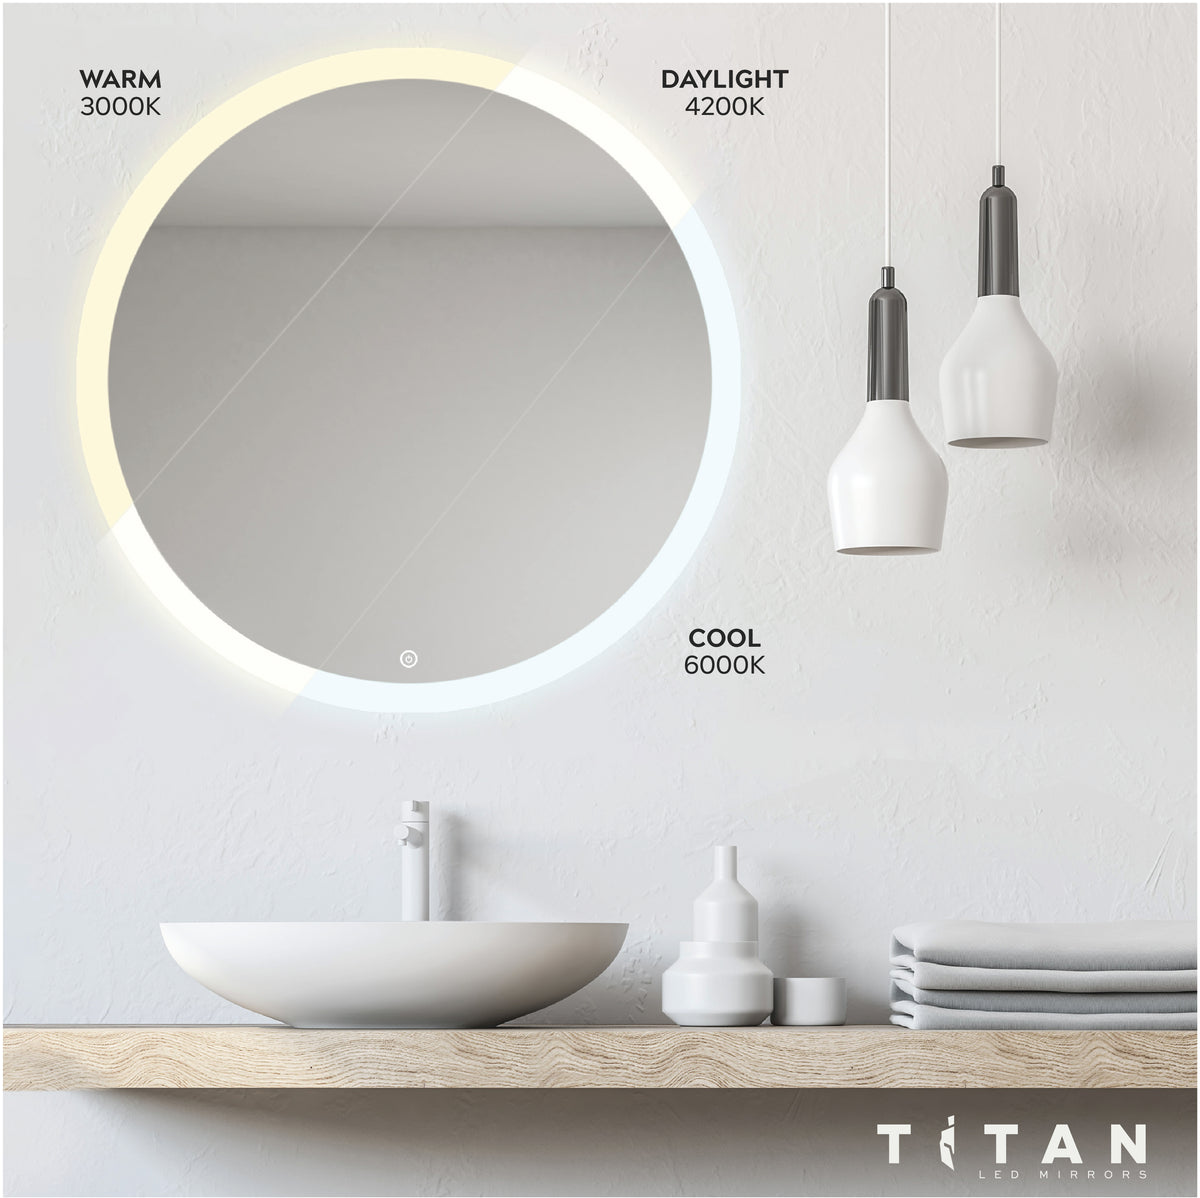 Touch Sensitive Mirror with the option of warm, daylight, and cool light levels